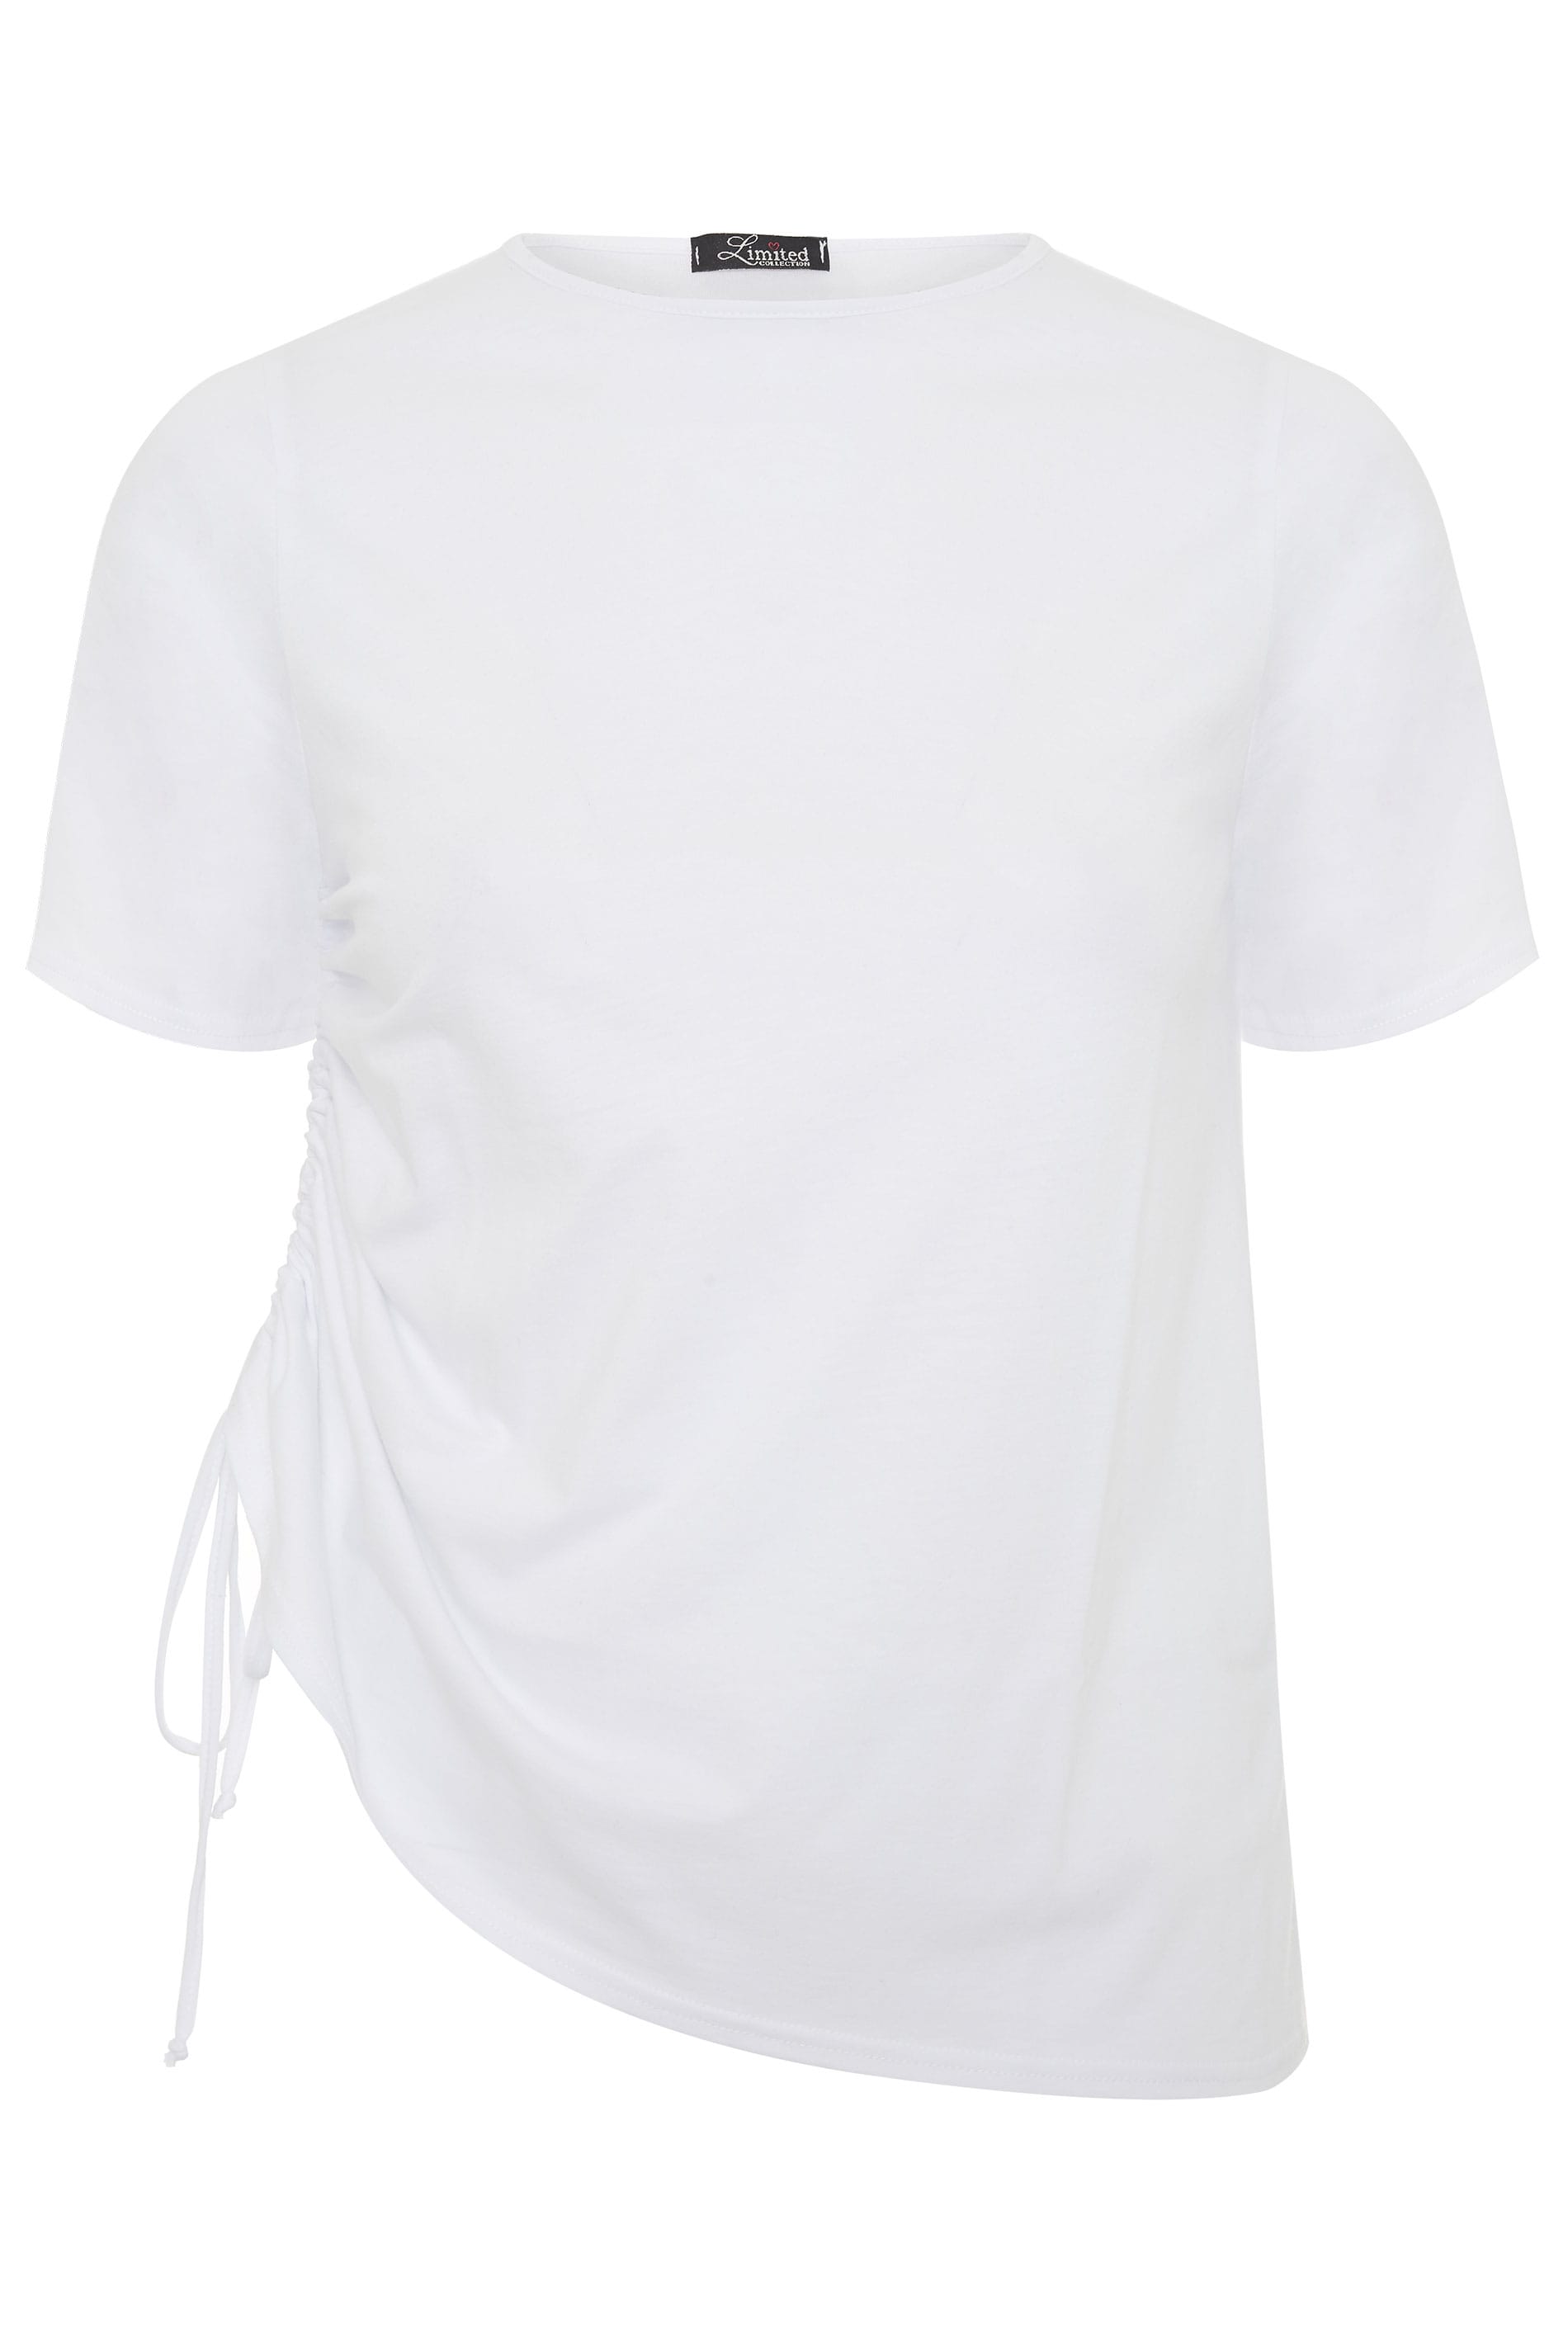 LIMITED COLLECTION White Ruched Tie Side Jersey Top | Yours Clothing